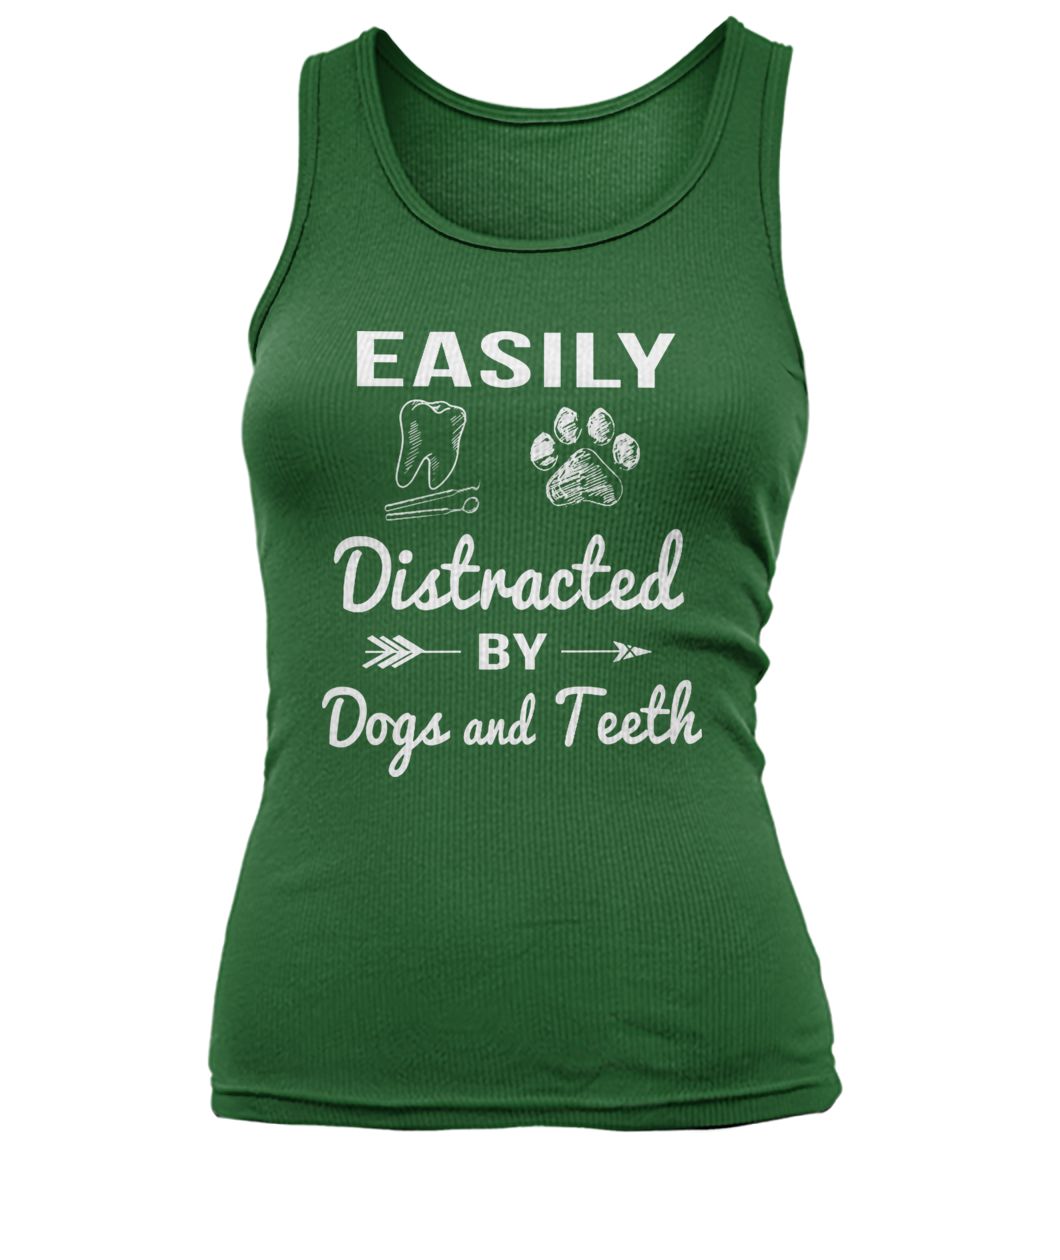 Easily distracted by dogs and teeth women's tank top